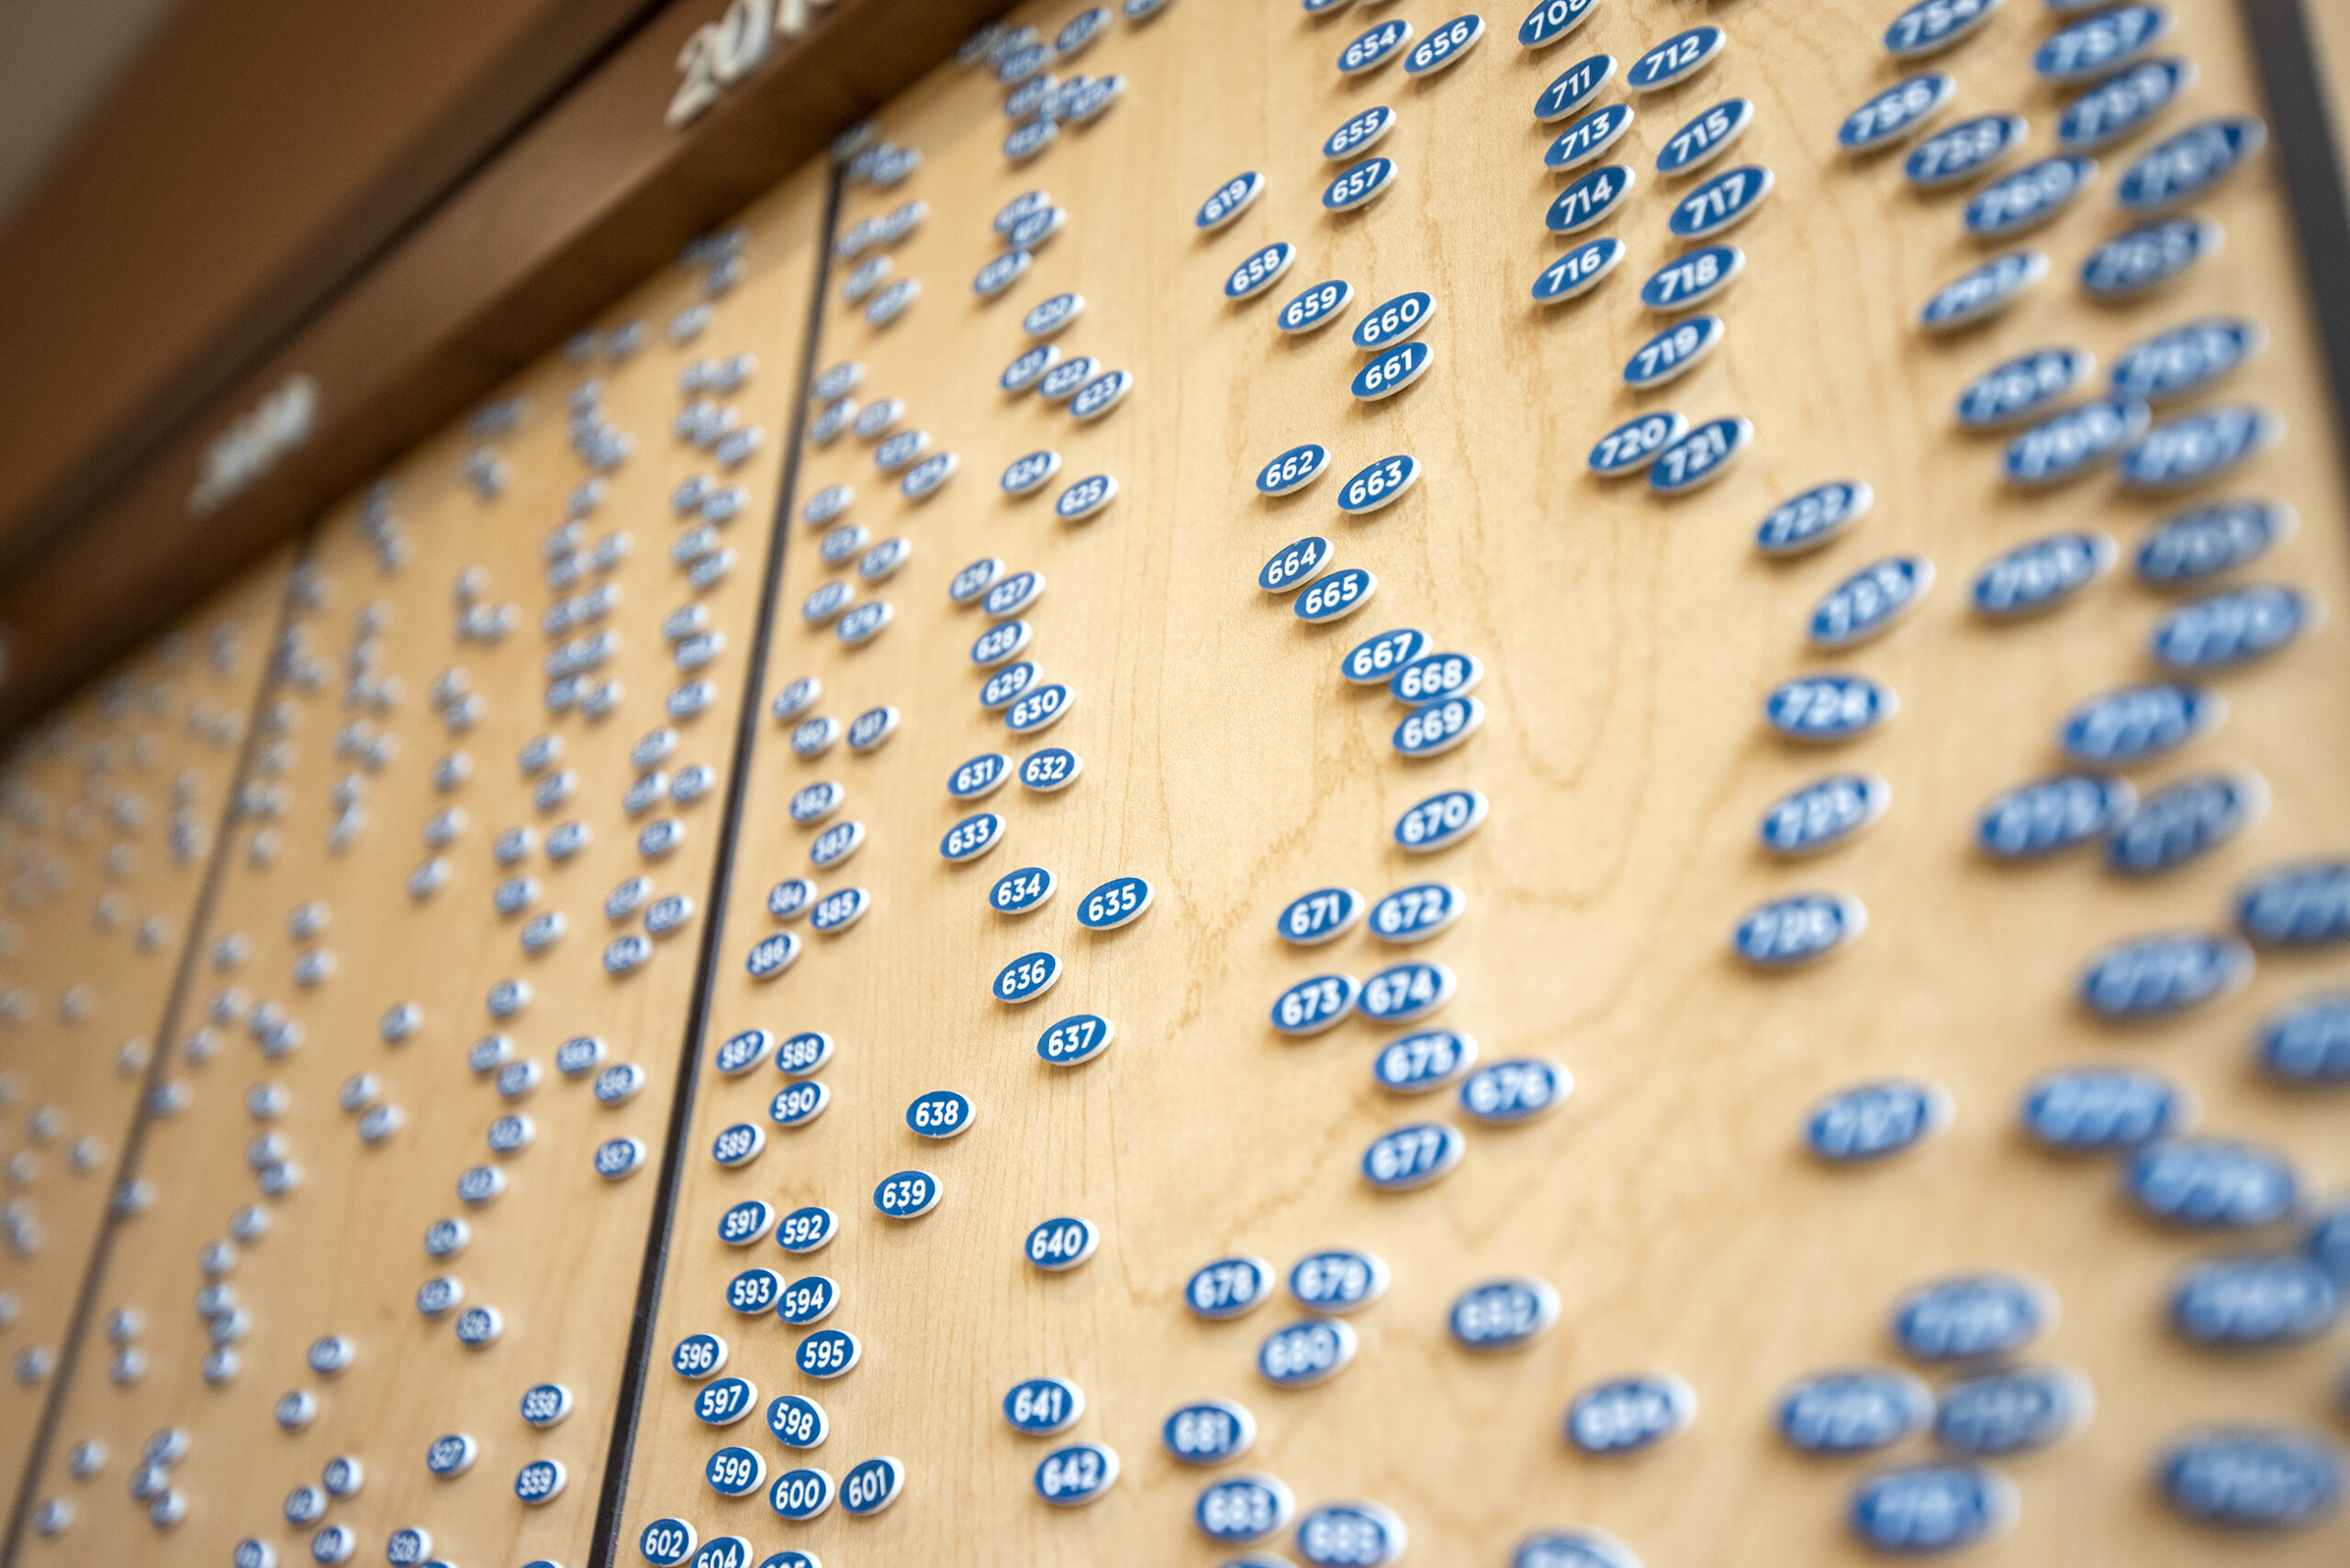 A large quantity of blue ovals with white numbers are stuck onto a wooden board inside the headquarters.